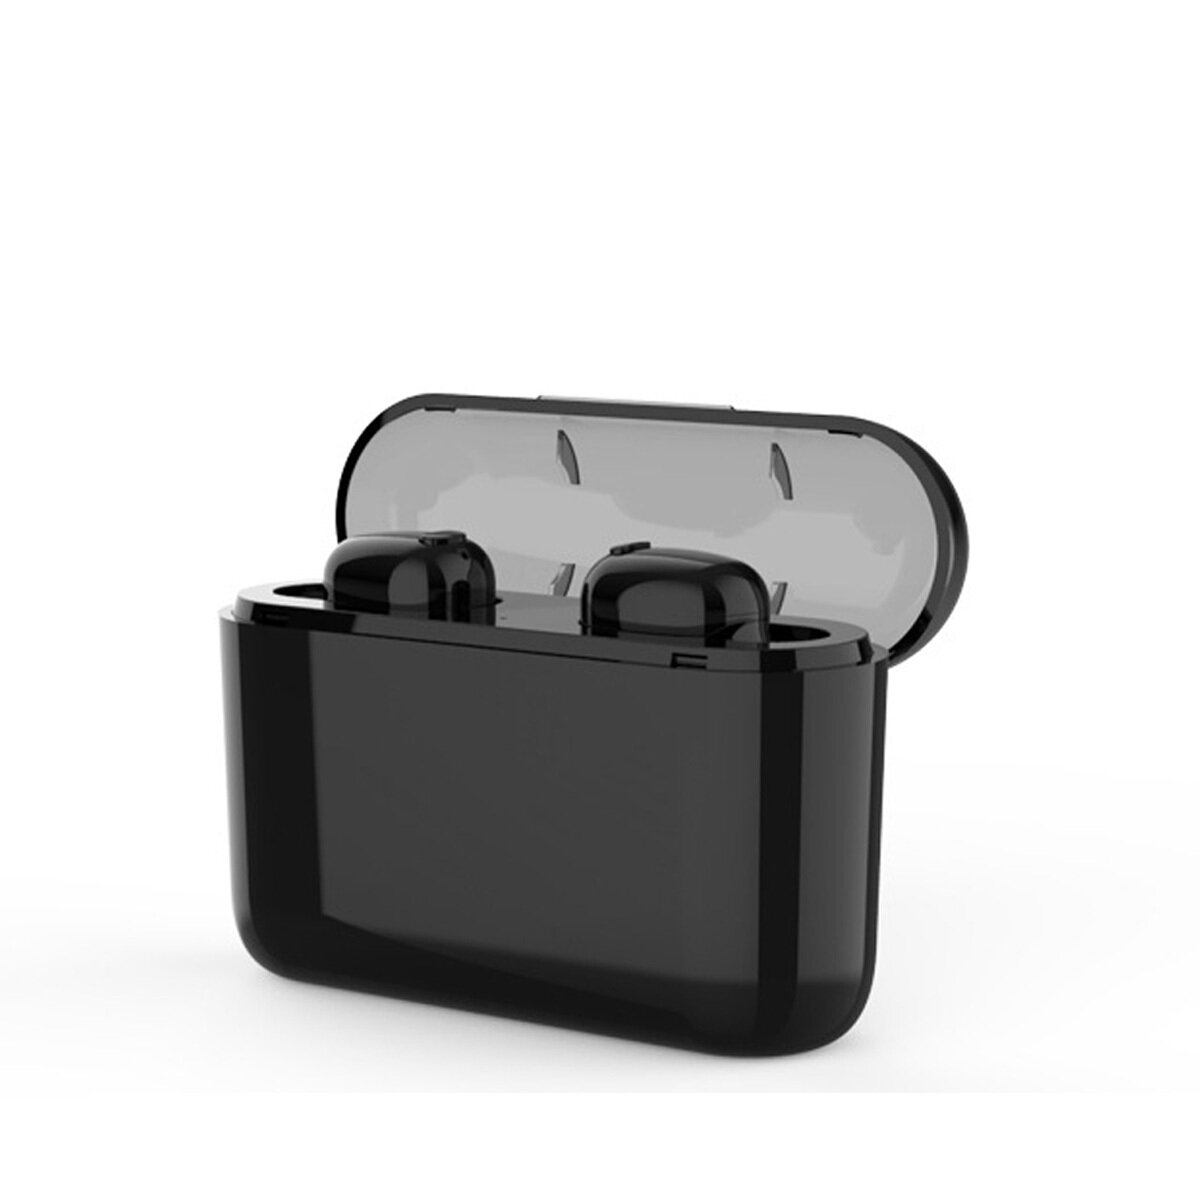 Image of [bluetooth 50] TWS Wireless Headphones Stereo Earphone Earbuds with 2200mAh Charging Box Power Bank